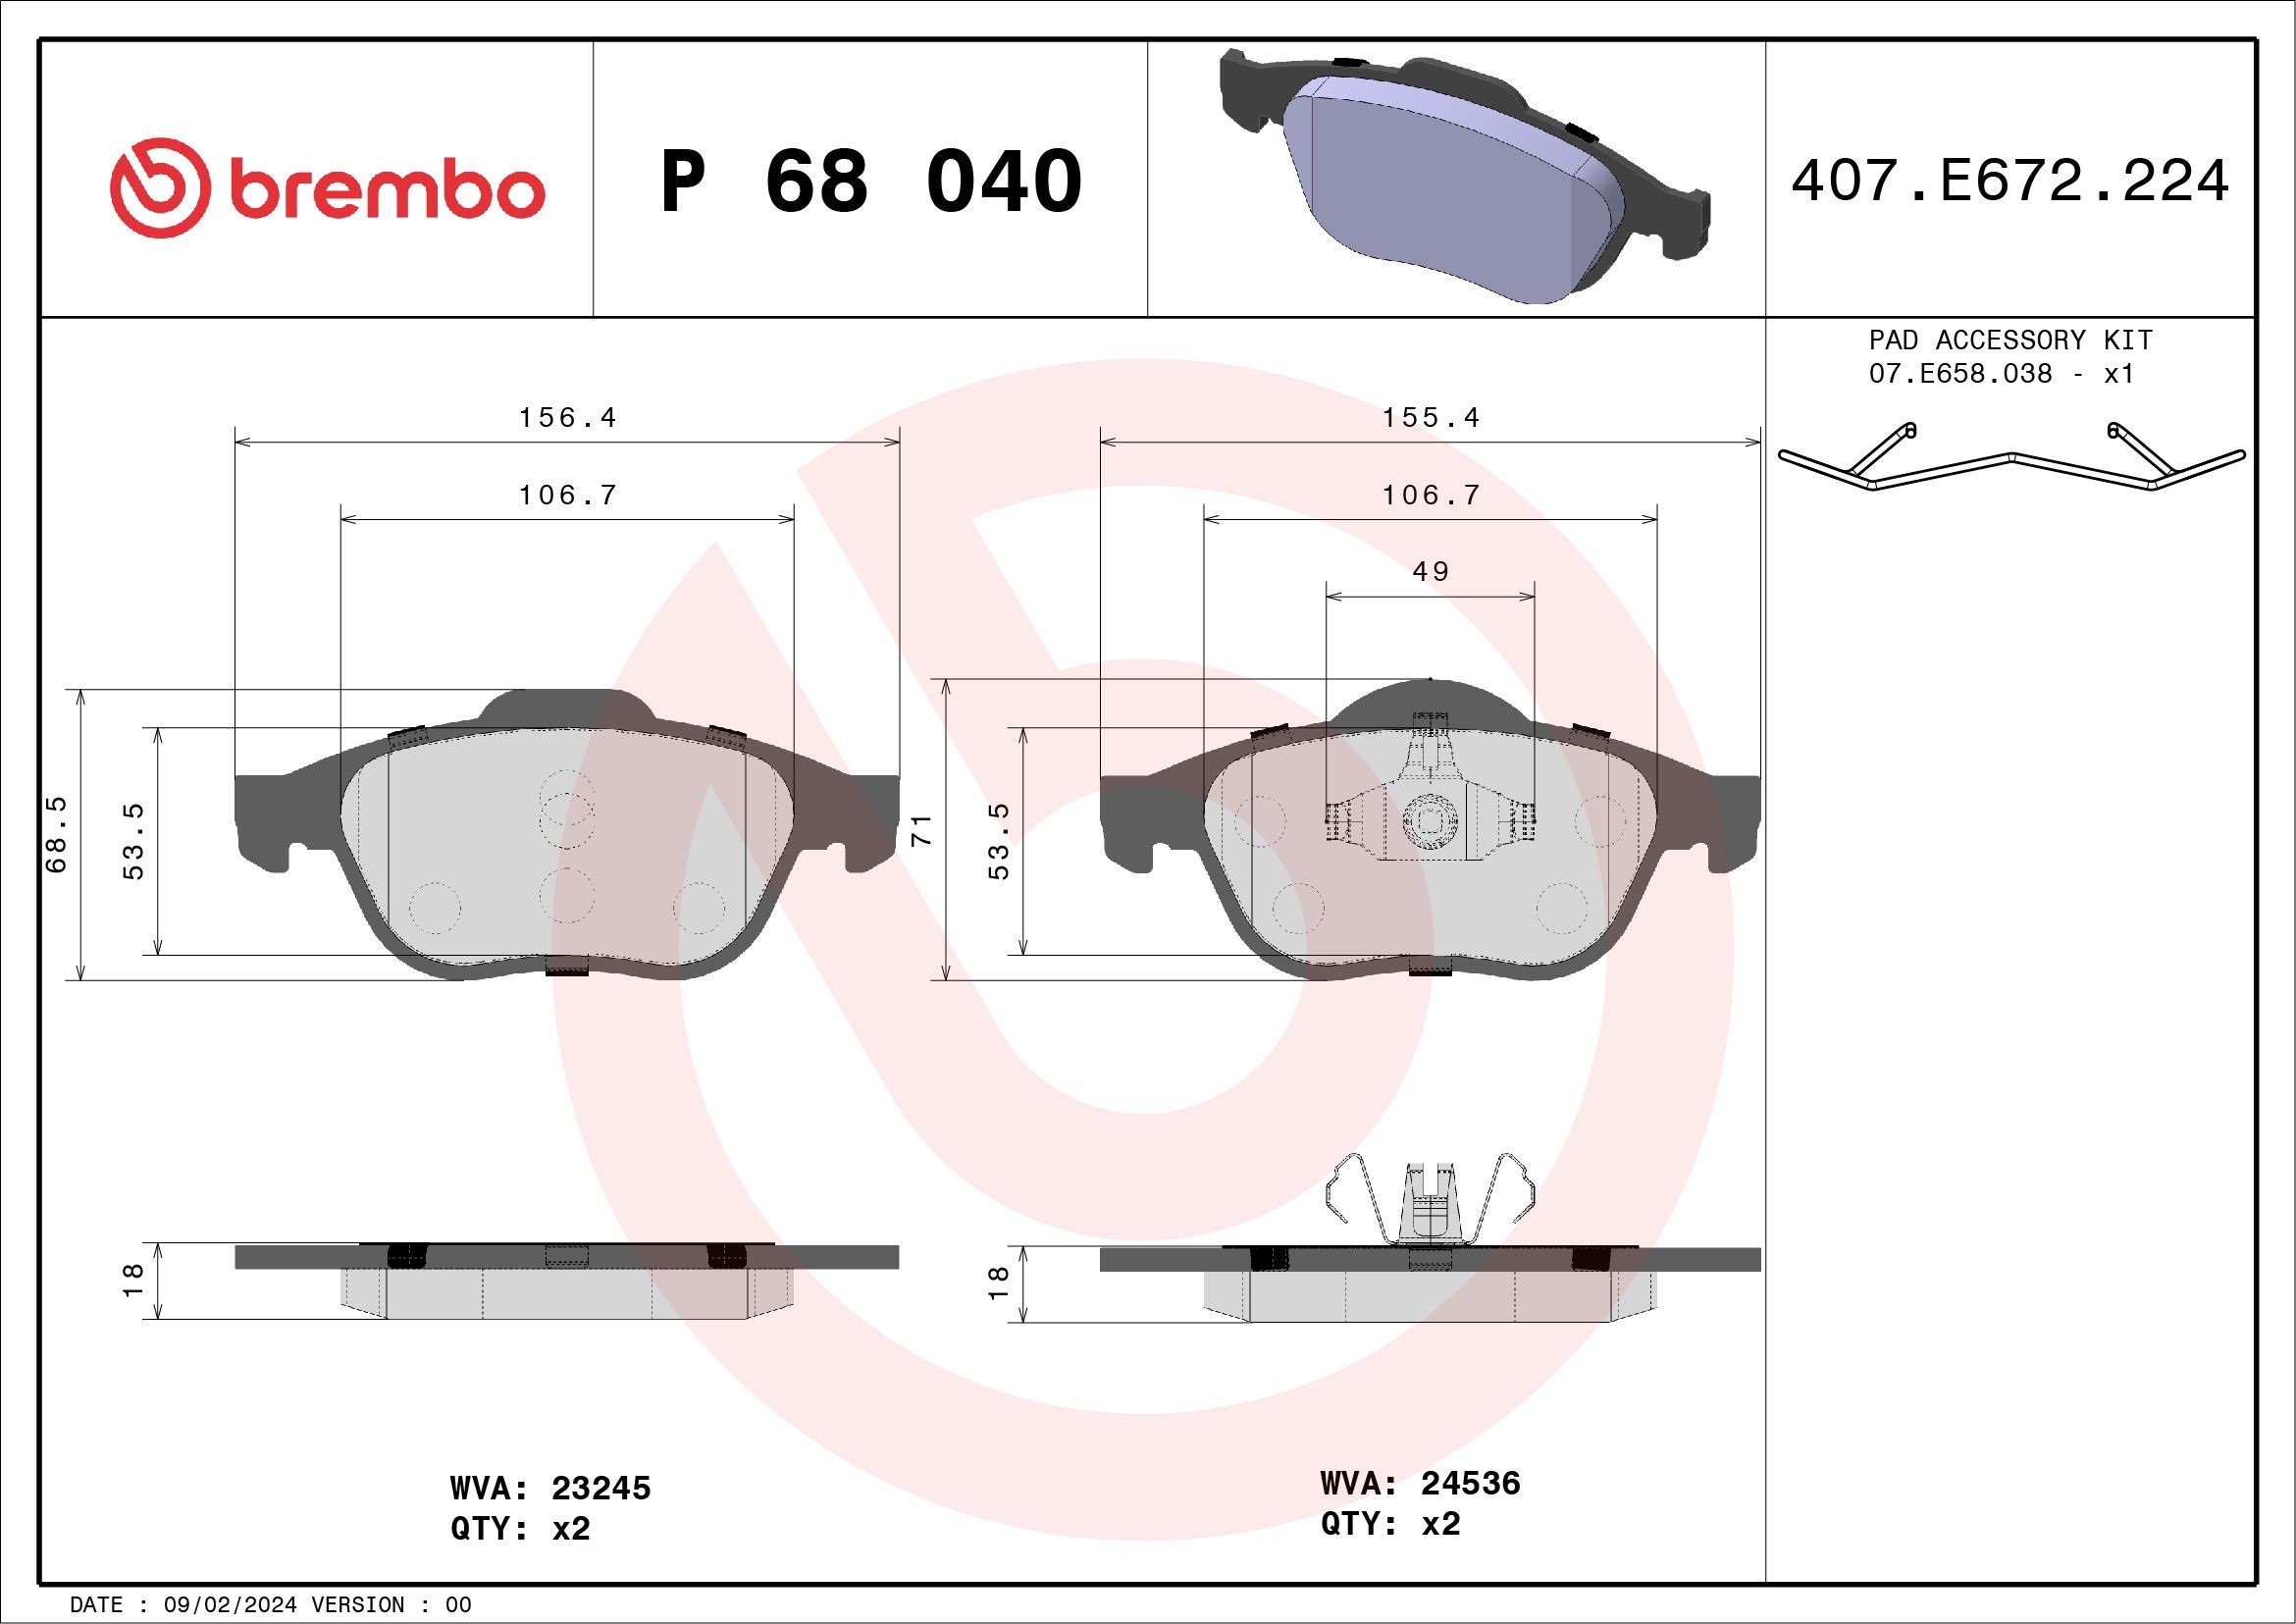 P68040 Set of brake pads D1456 8656 BREMBO excl. wear warning contact, with piston clip, with accessories